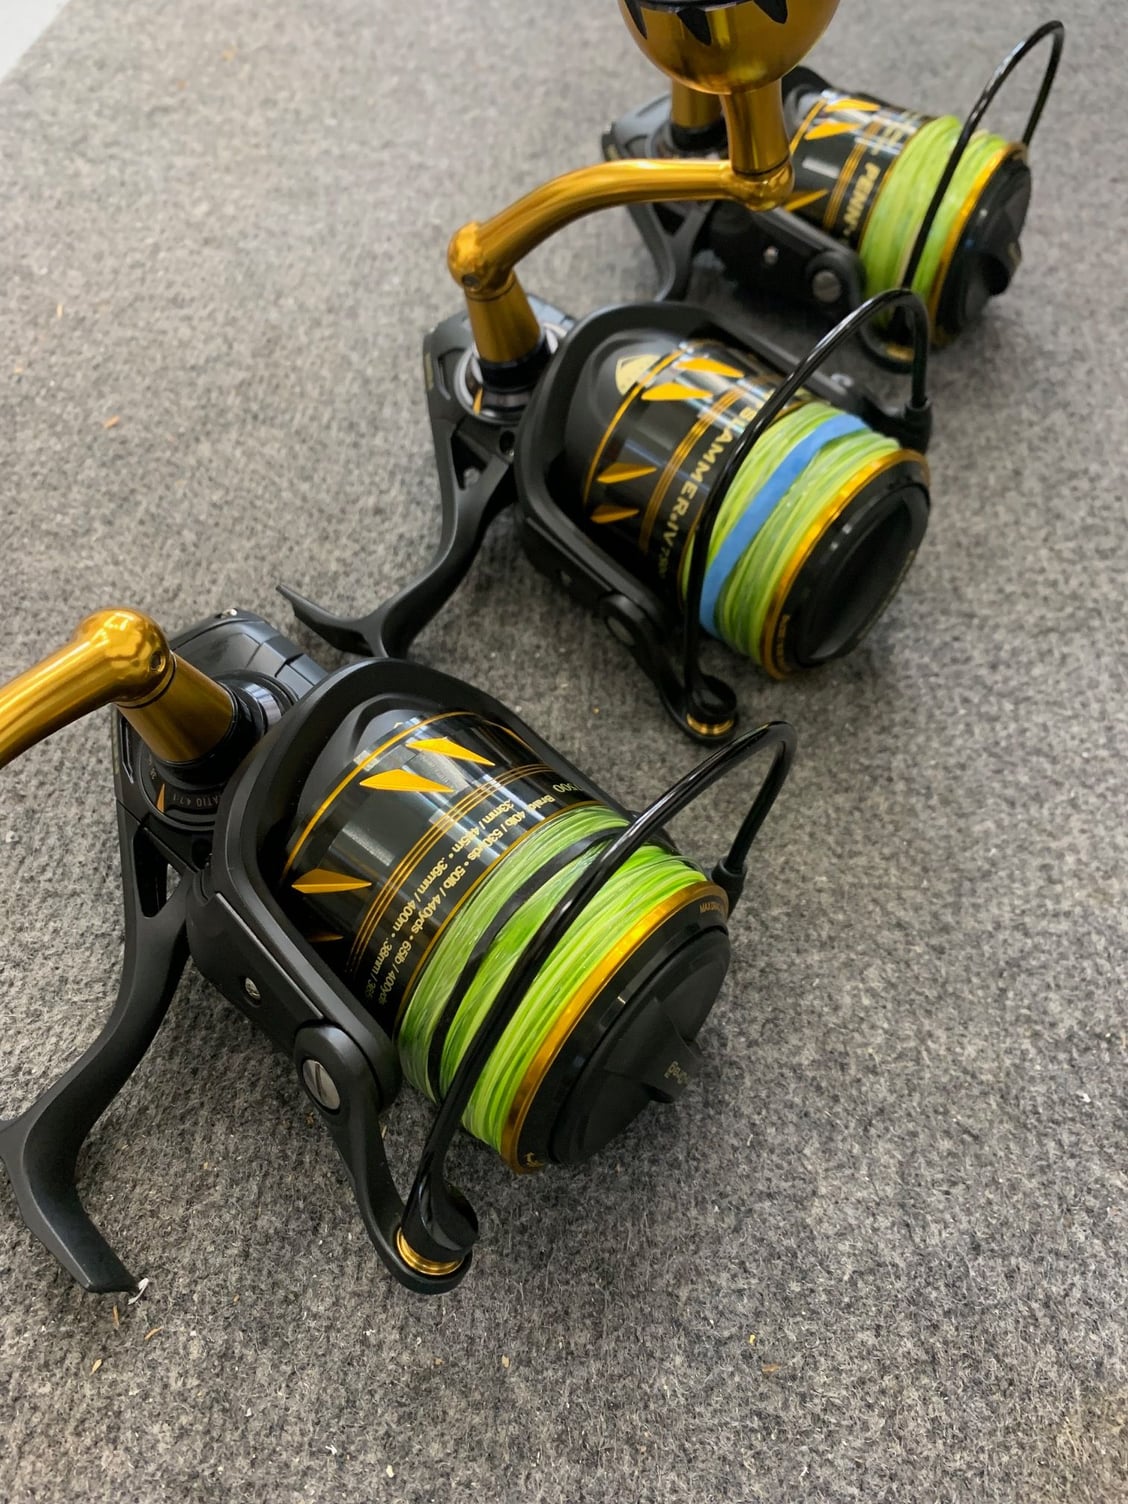 Daiwa Procyon 4000 AL / Duckett inshore spinning combo - The Hull Truth -  Boating and Fishing Forum